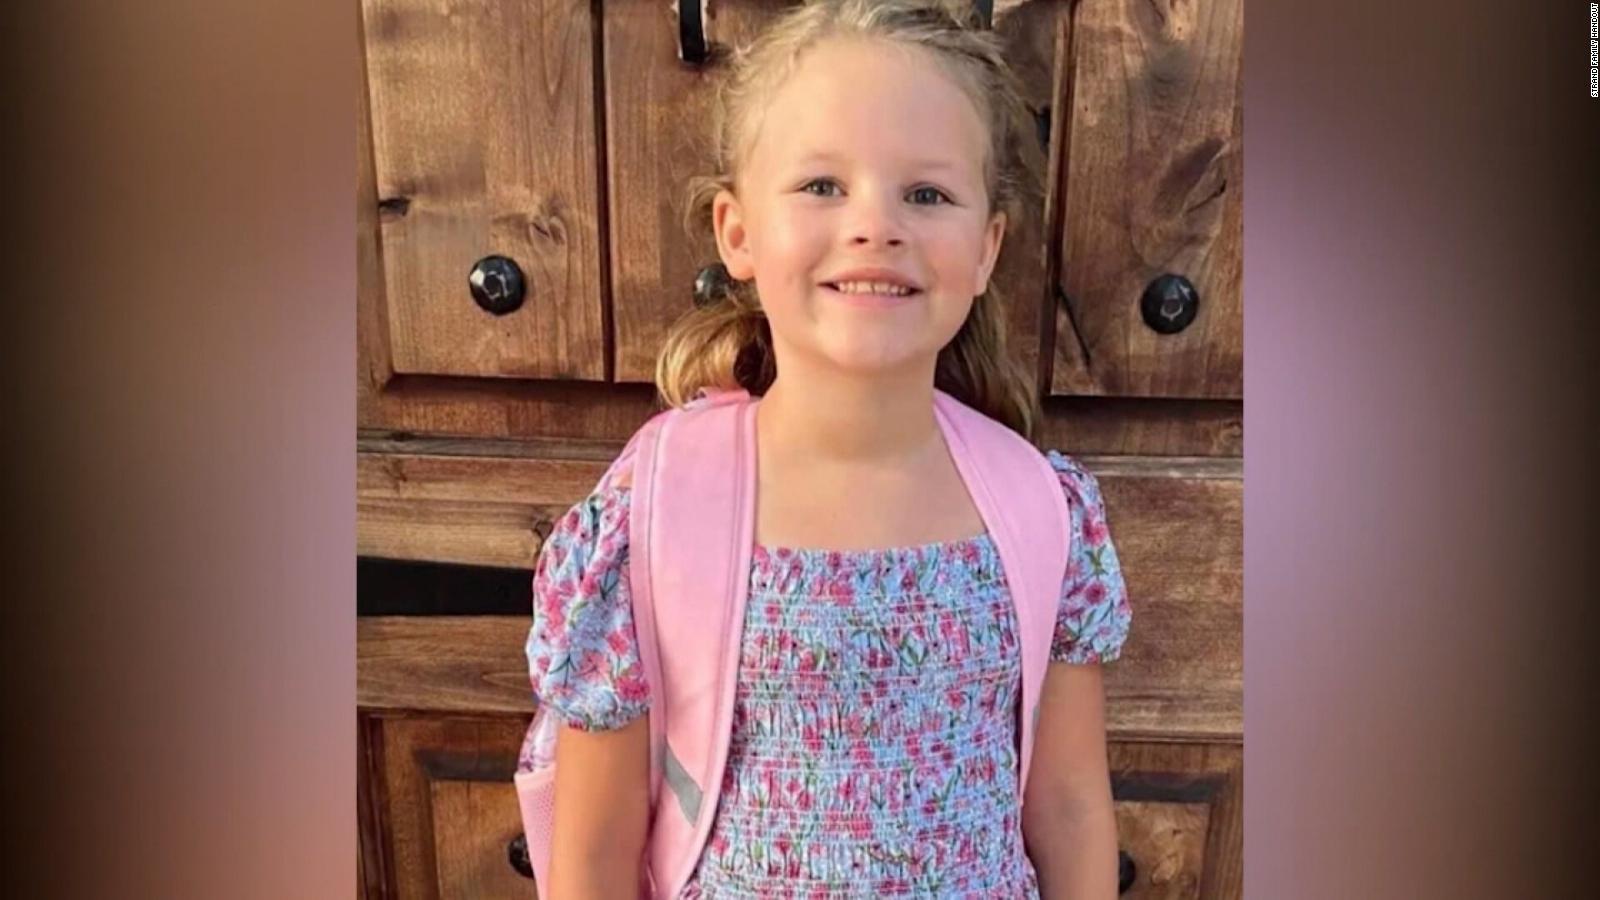 Delivery driver indicted for murder of 7 year old Athena Strand in